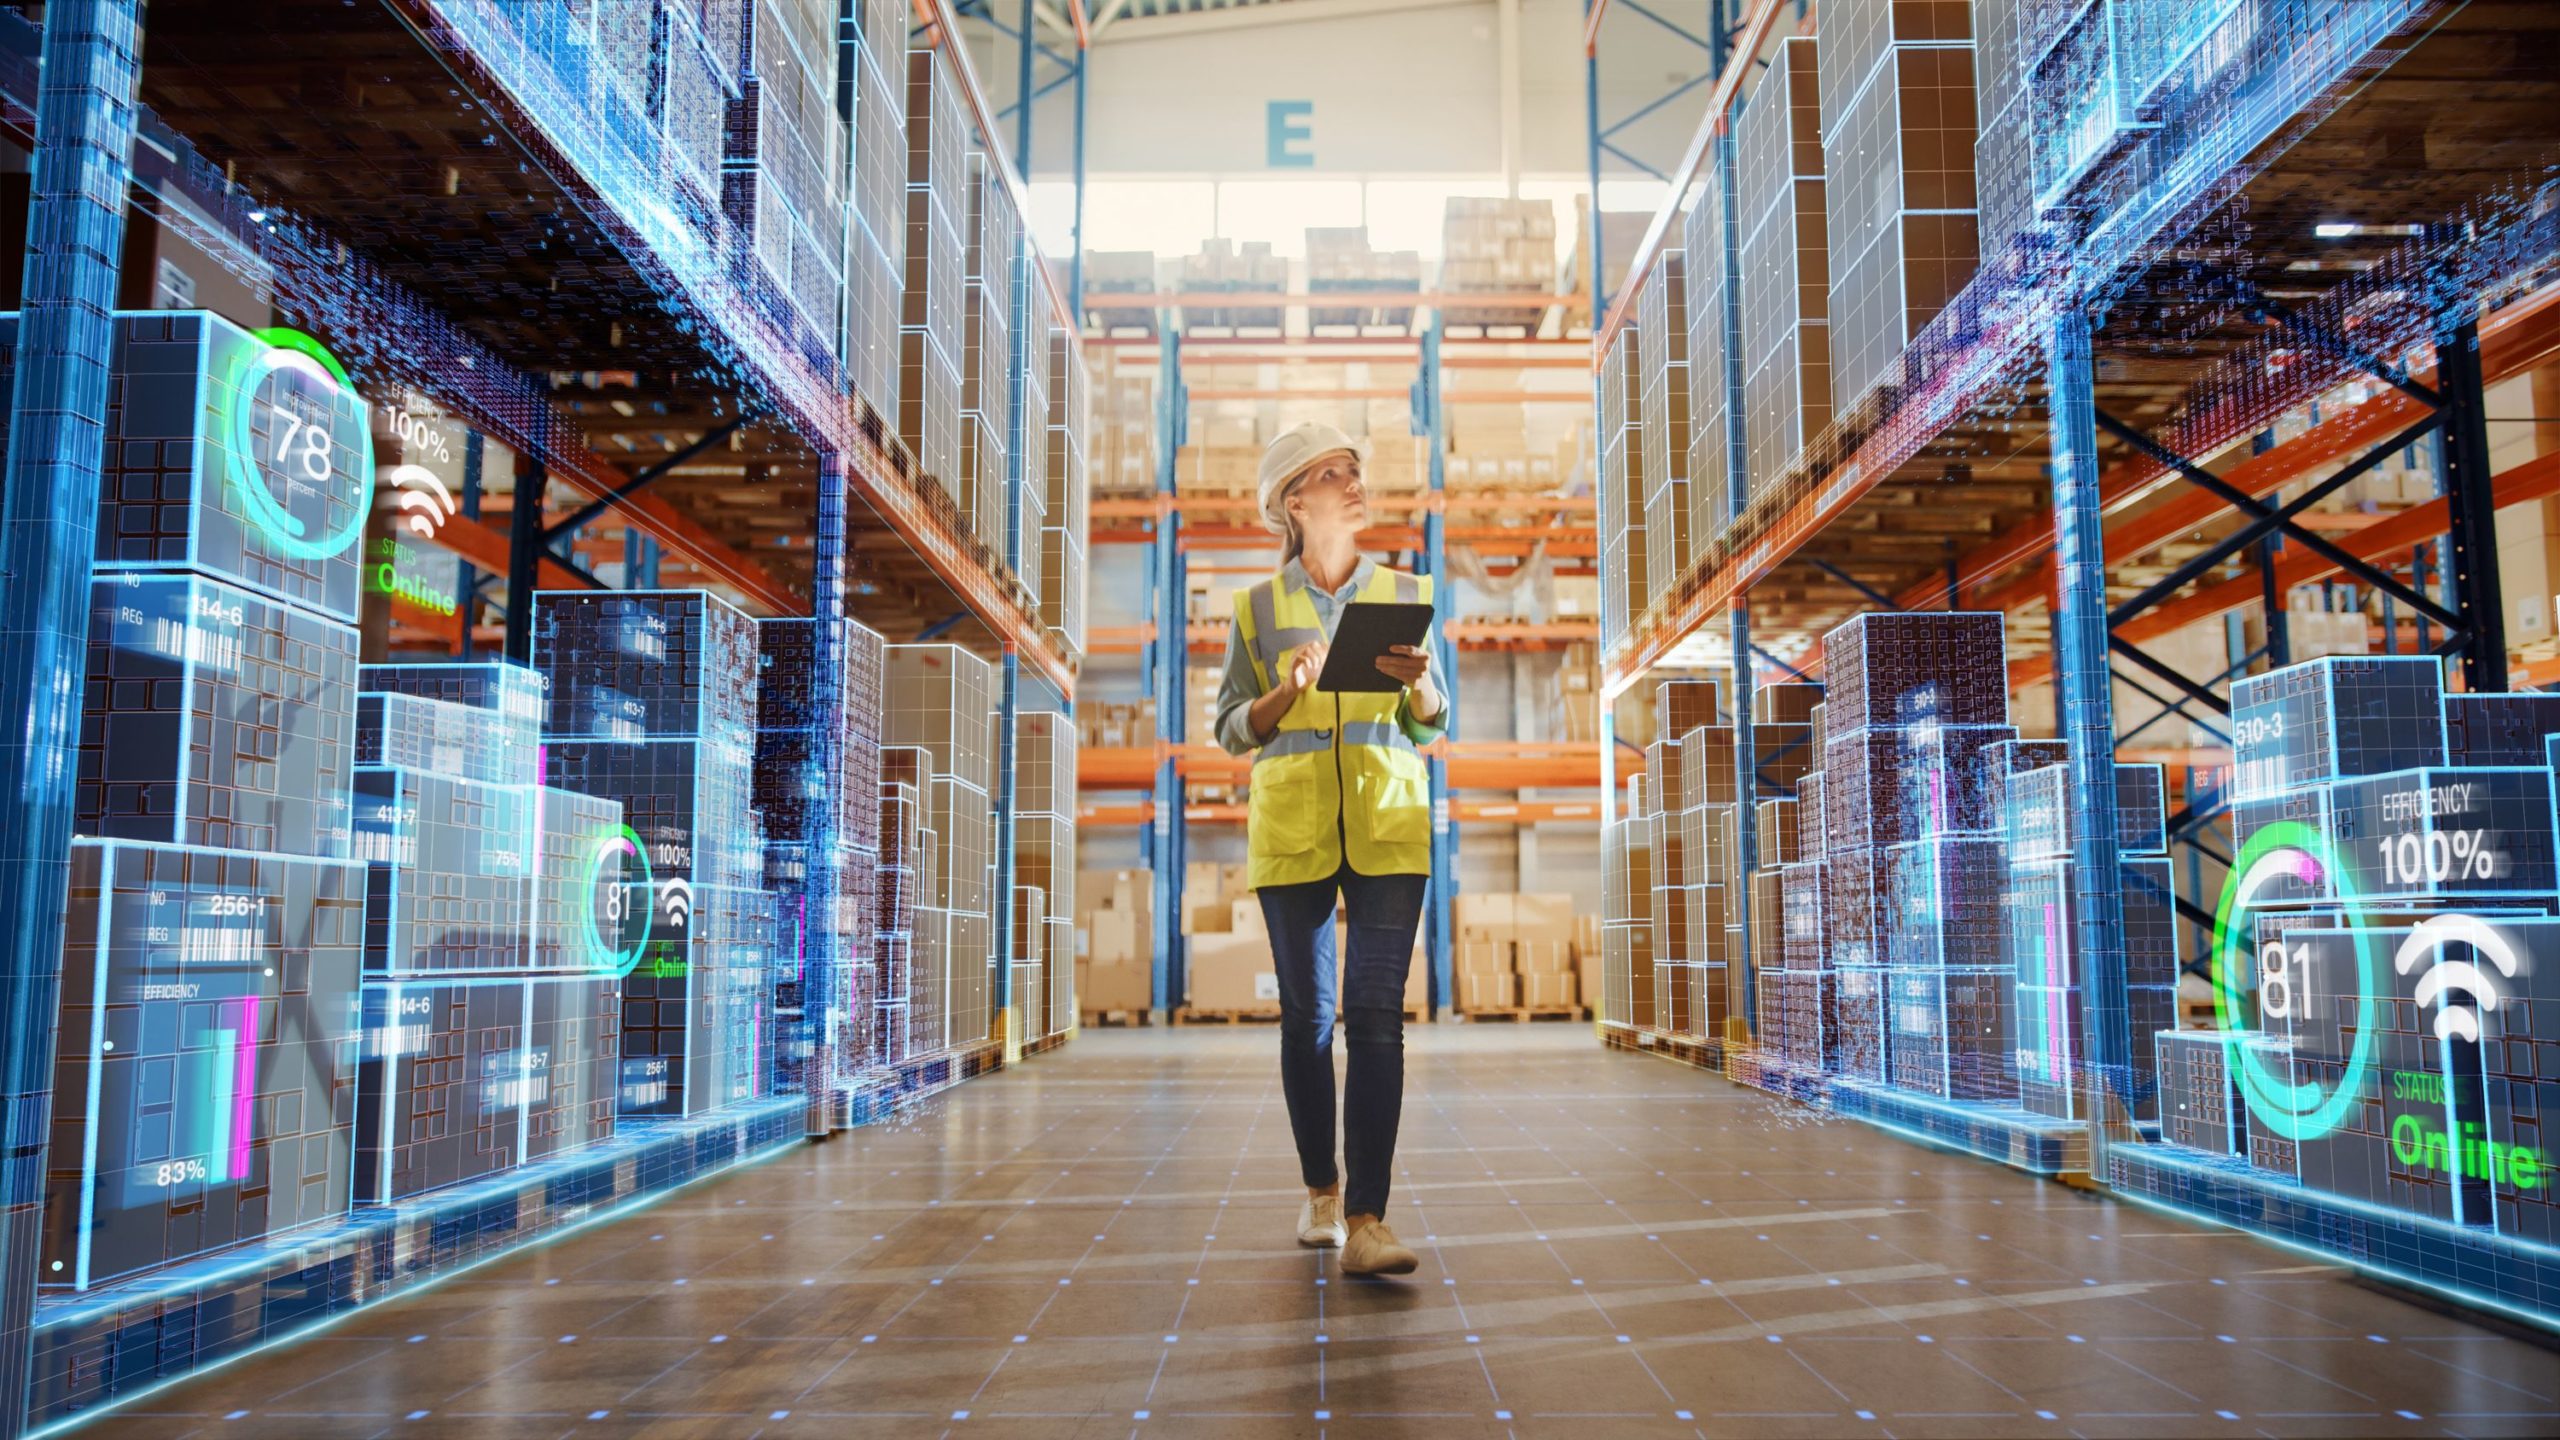 futuristic-technology-retail-warehouse-worker-doing-inventory-walks-when-digitalization-process-analyzes-goods-cardboard-boxes-products-with-delivery-infographics-in-logistics-distribution-center